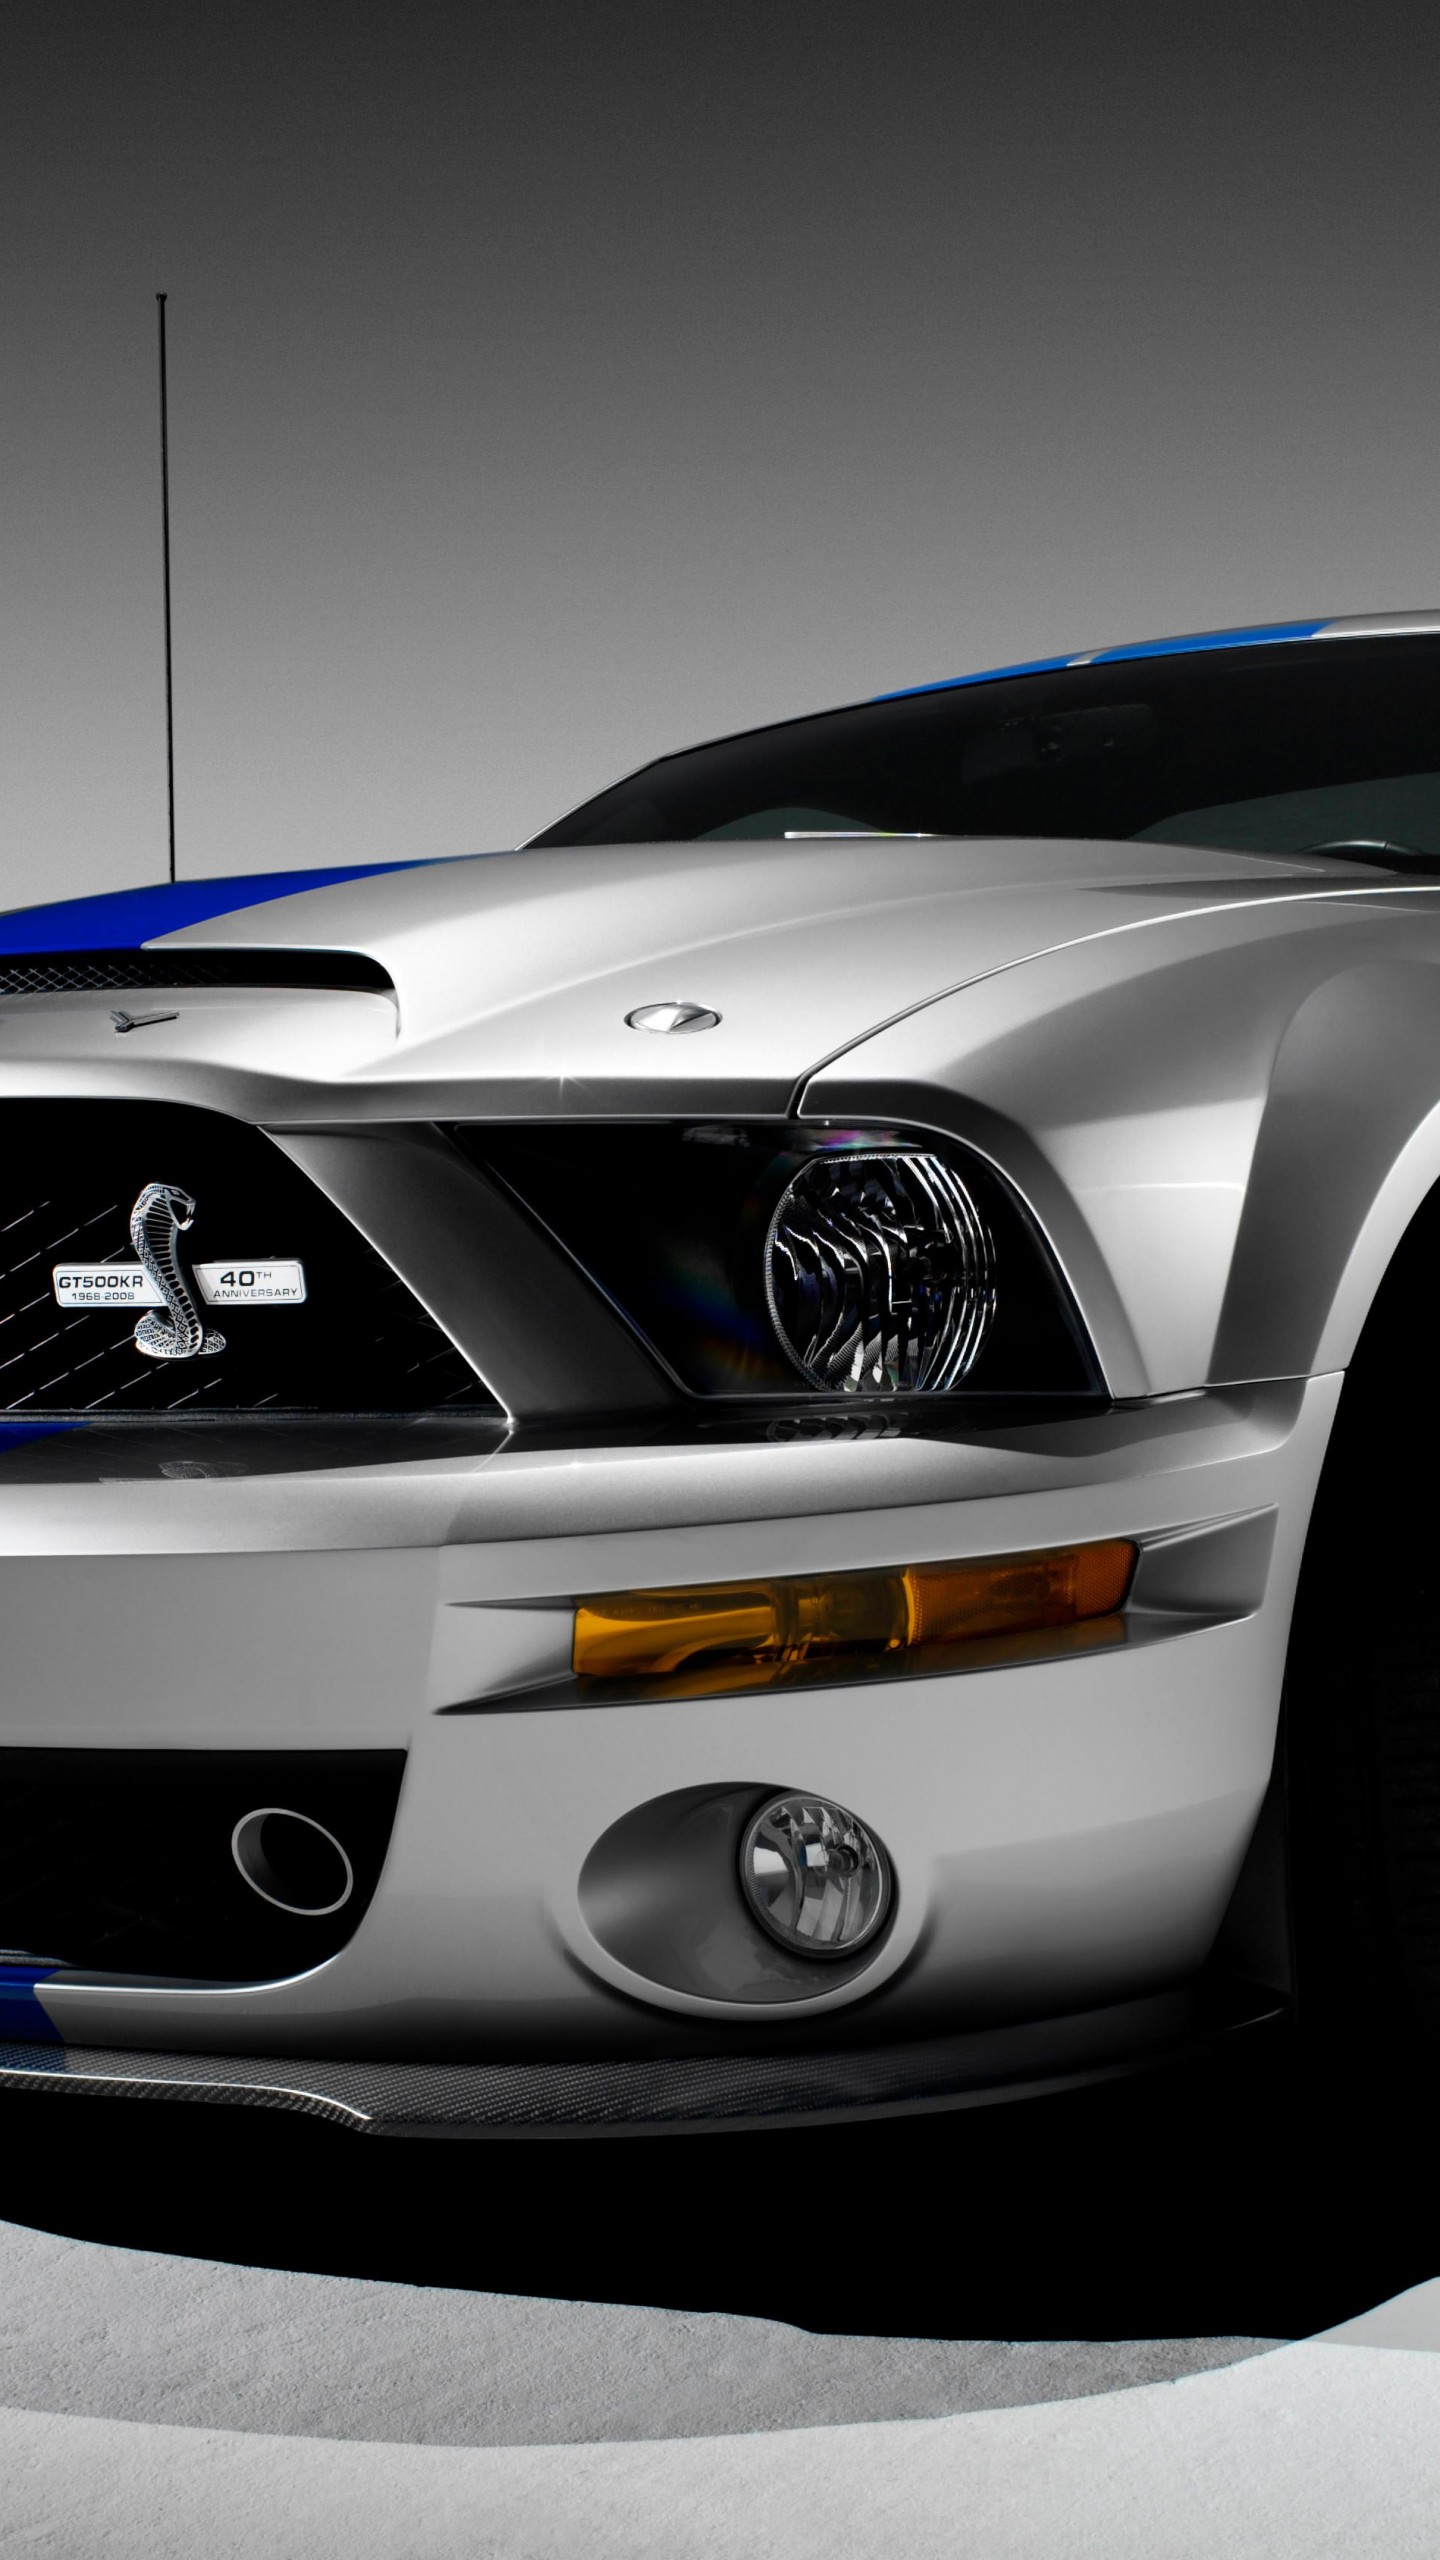 Shelby Mustang GT500KR Wallpaper for SAMSUNG Galaxy S6